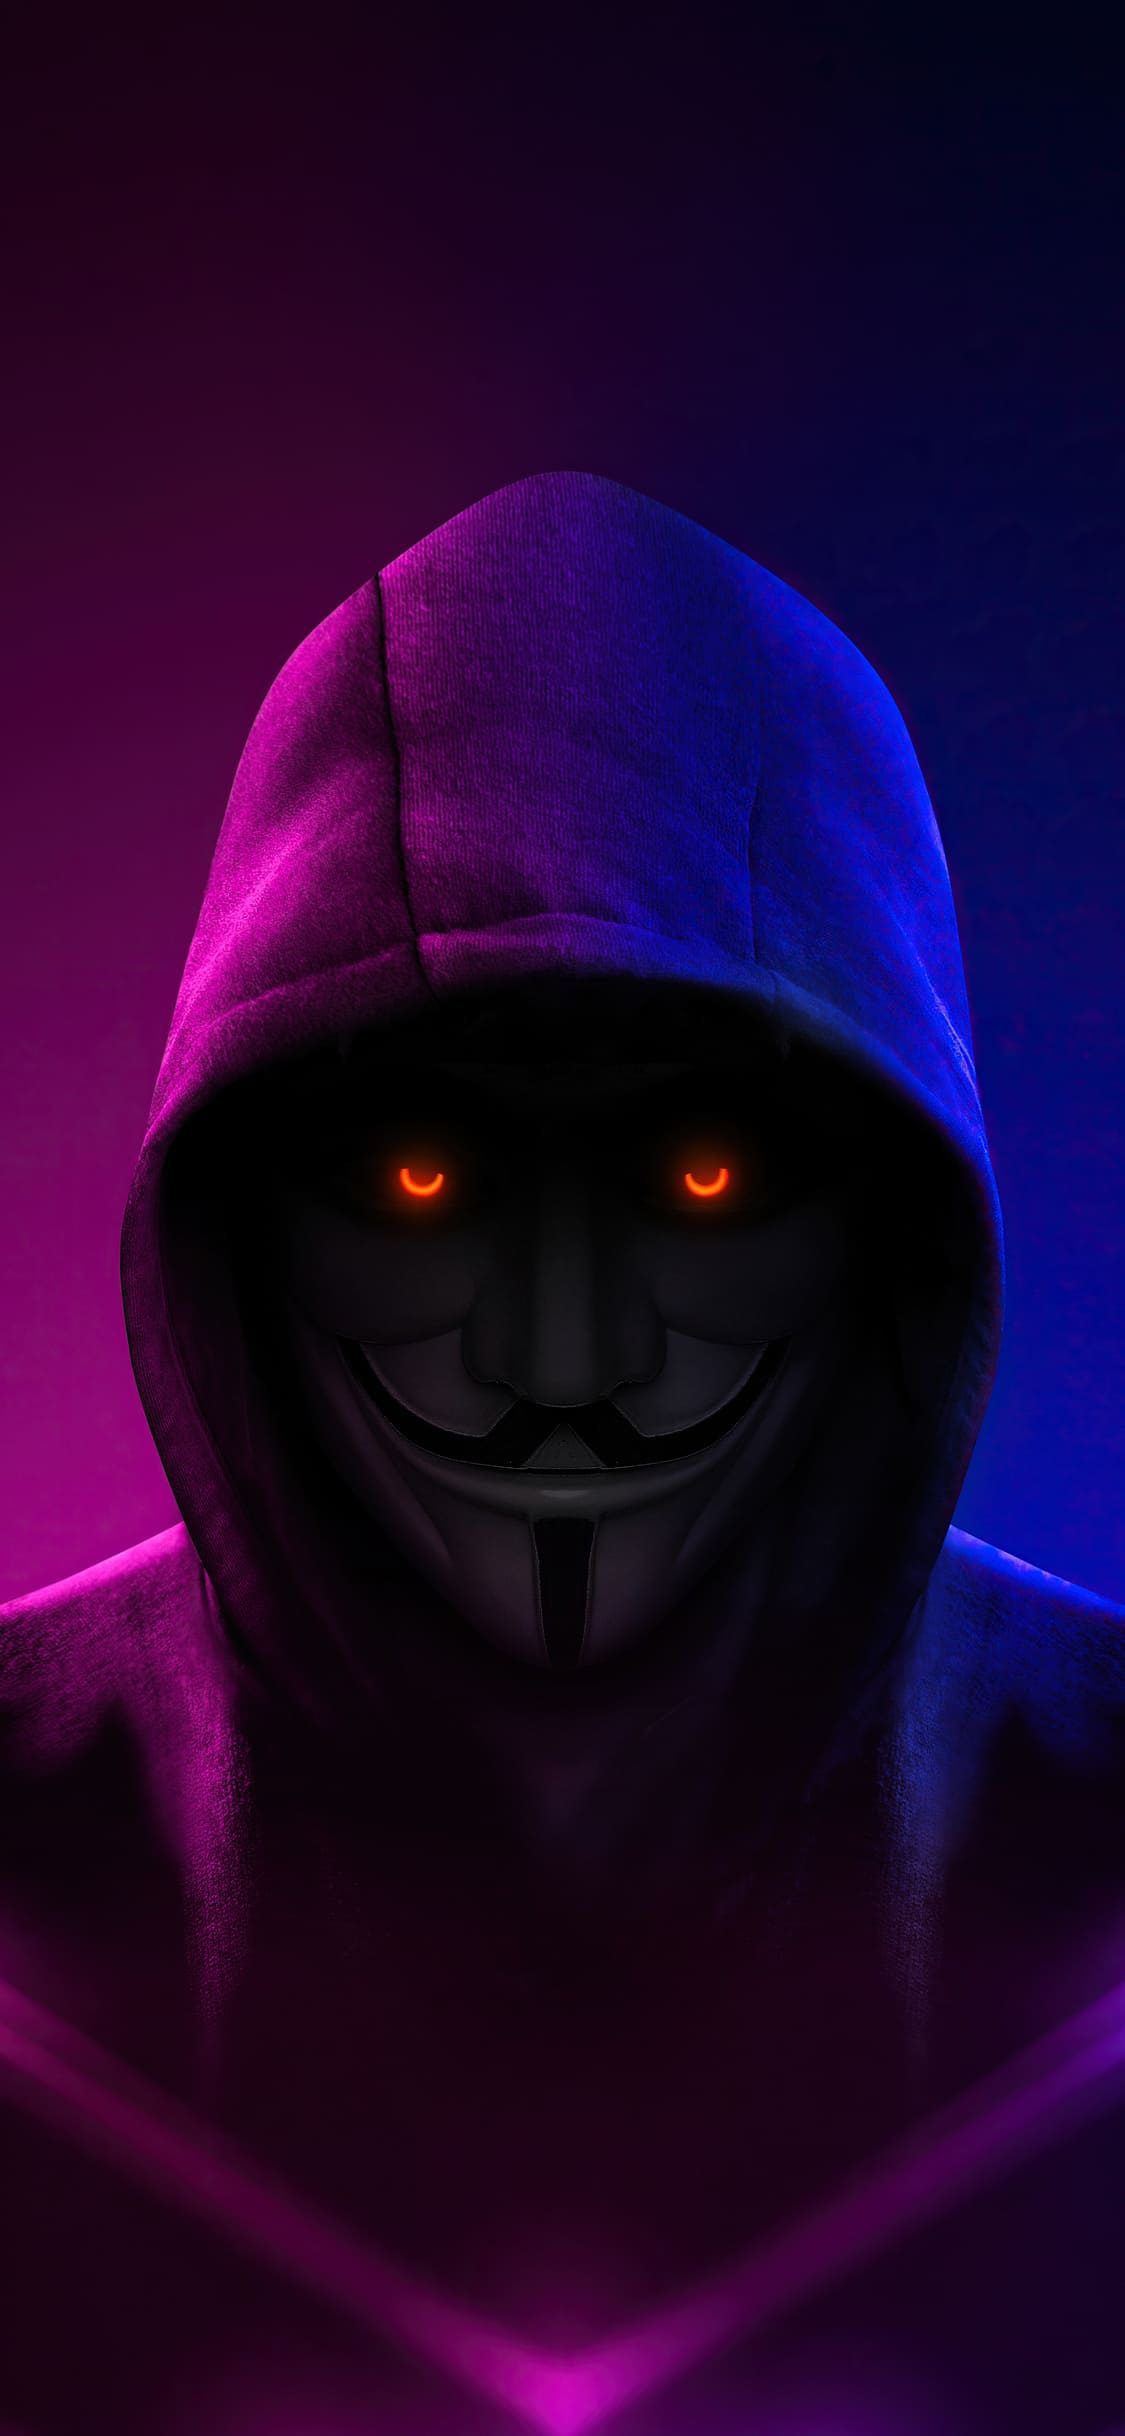 Top 35 Best Anonymus iPhone Wallpapers - Gettywallpapers